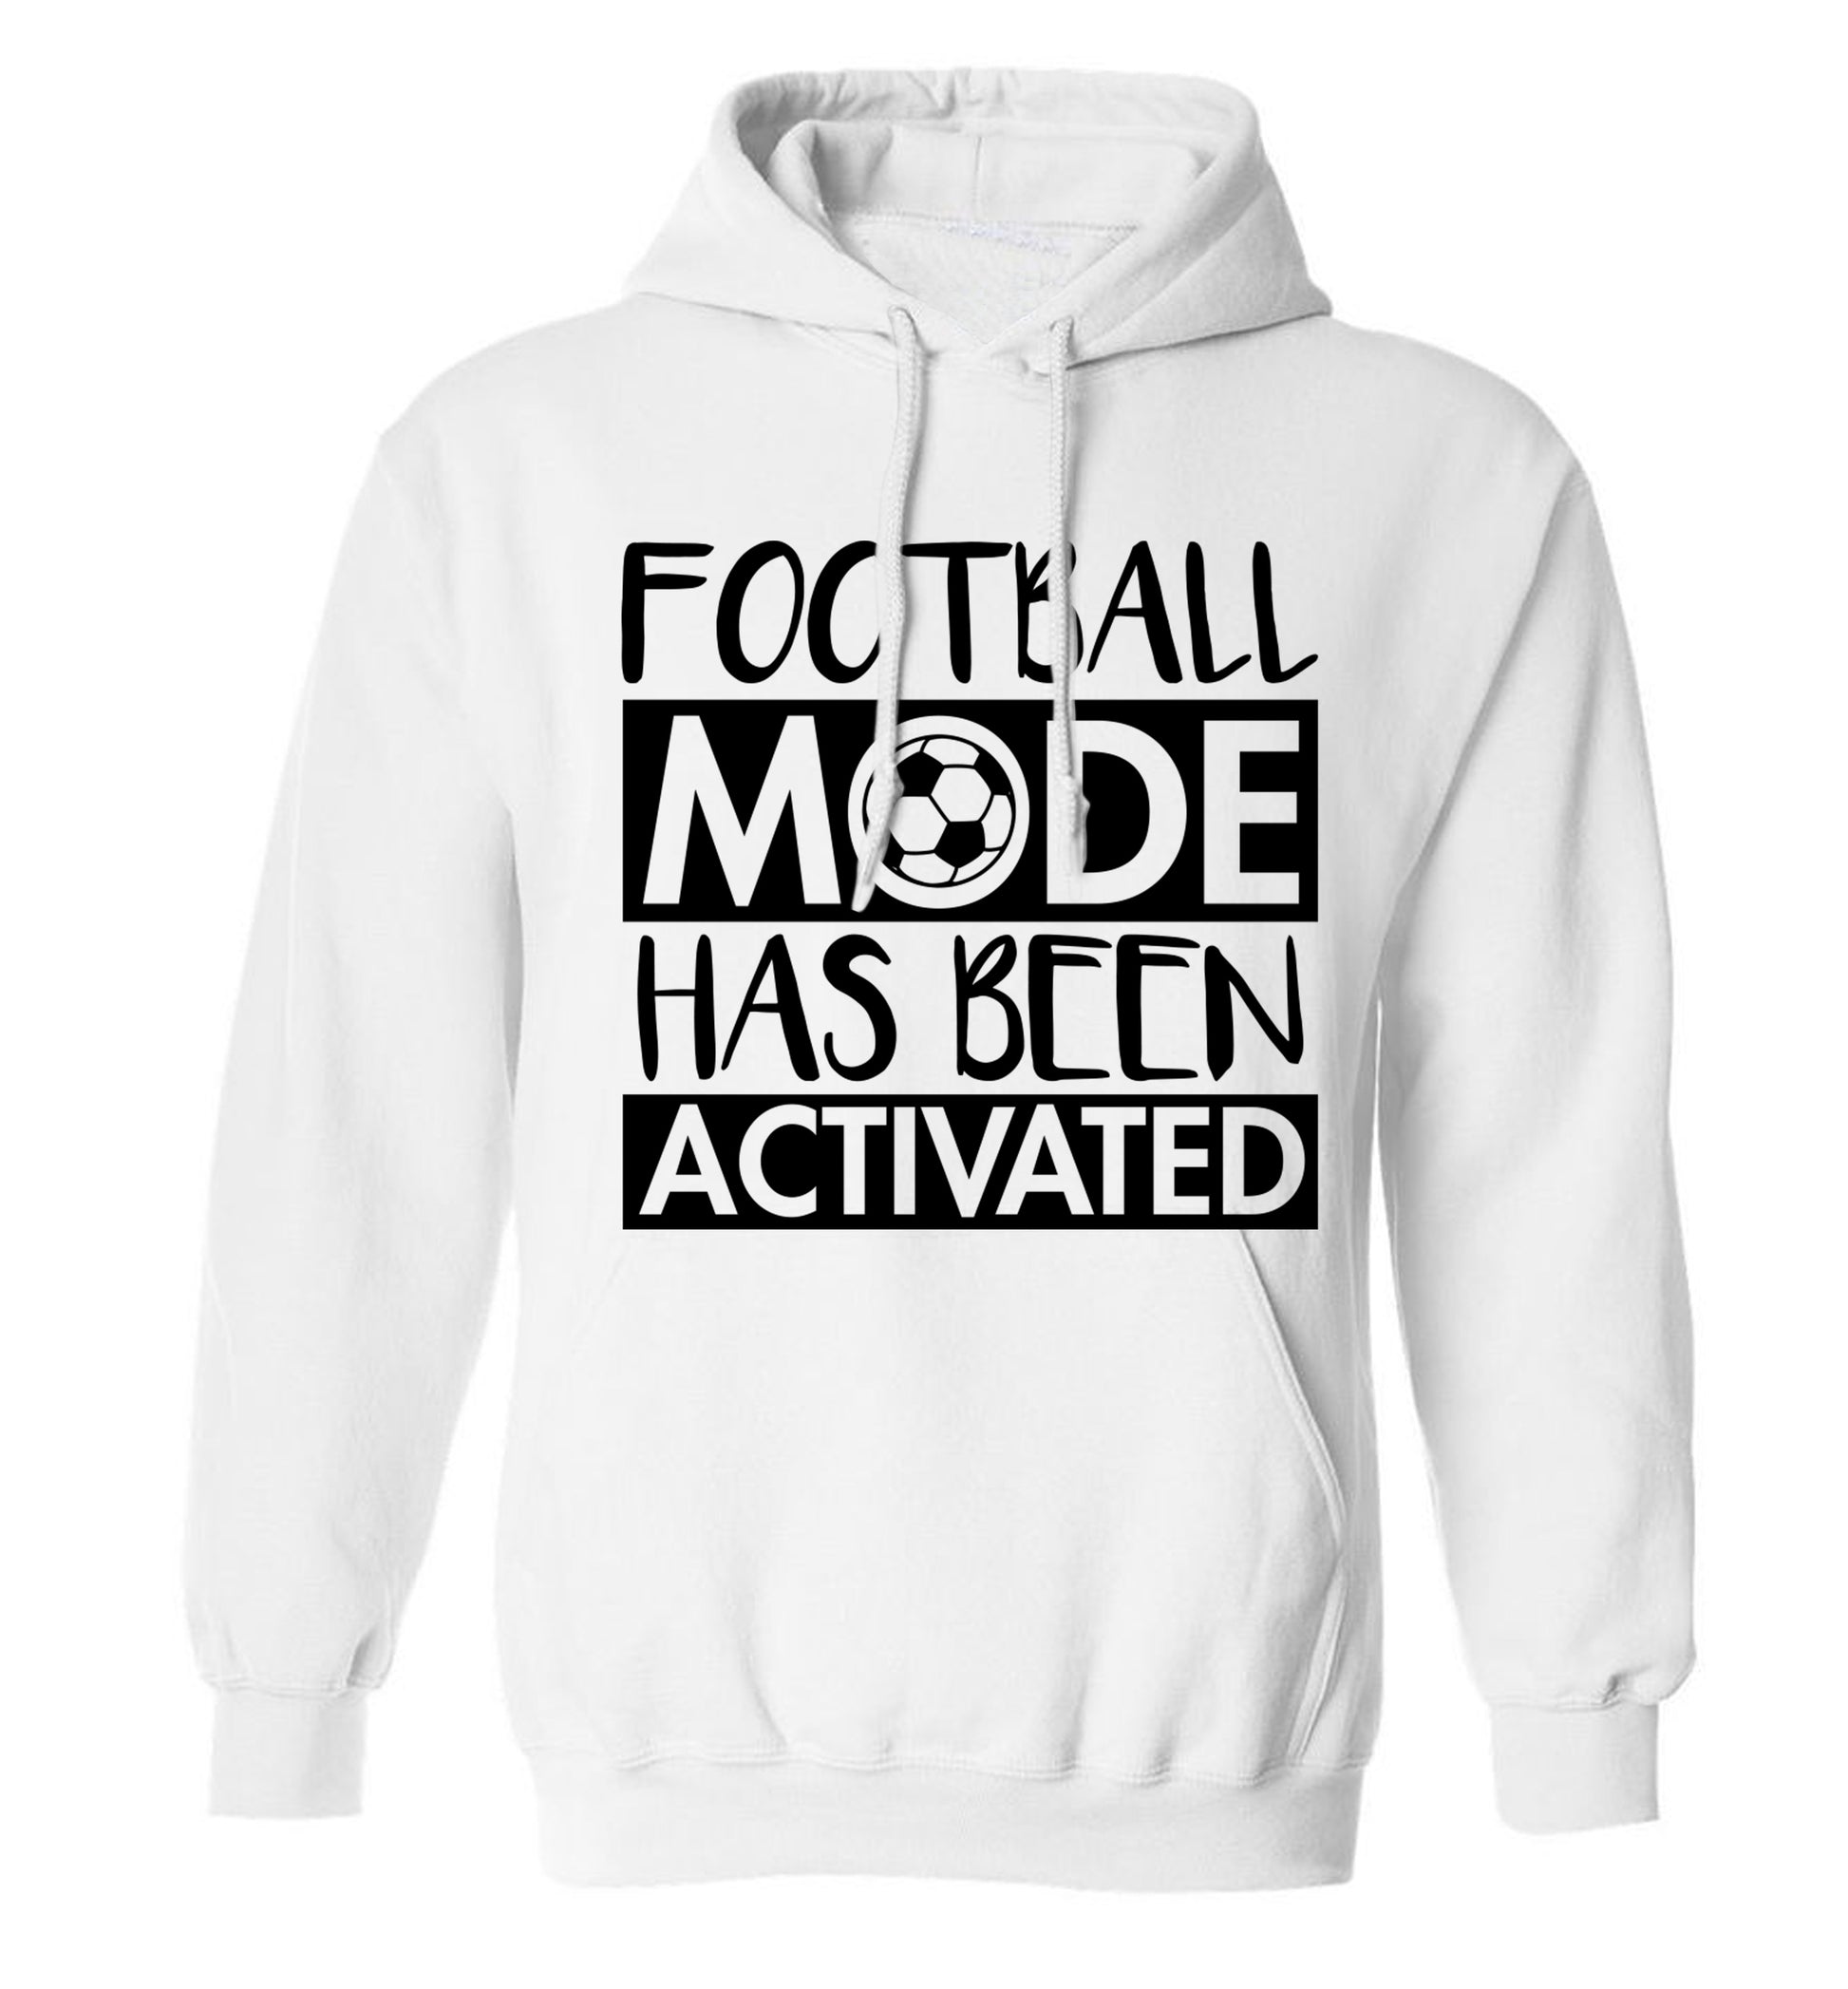 Football mode has been activated adults unisexwhite hoodie 2XL